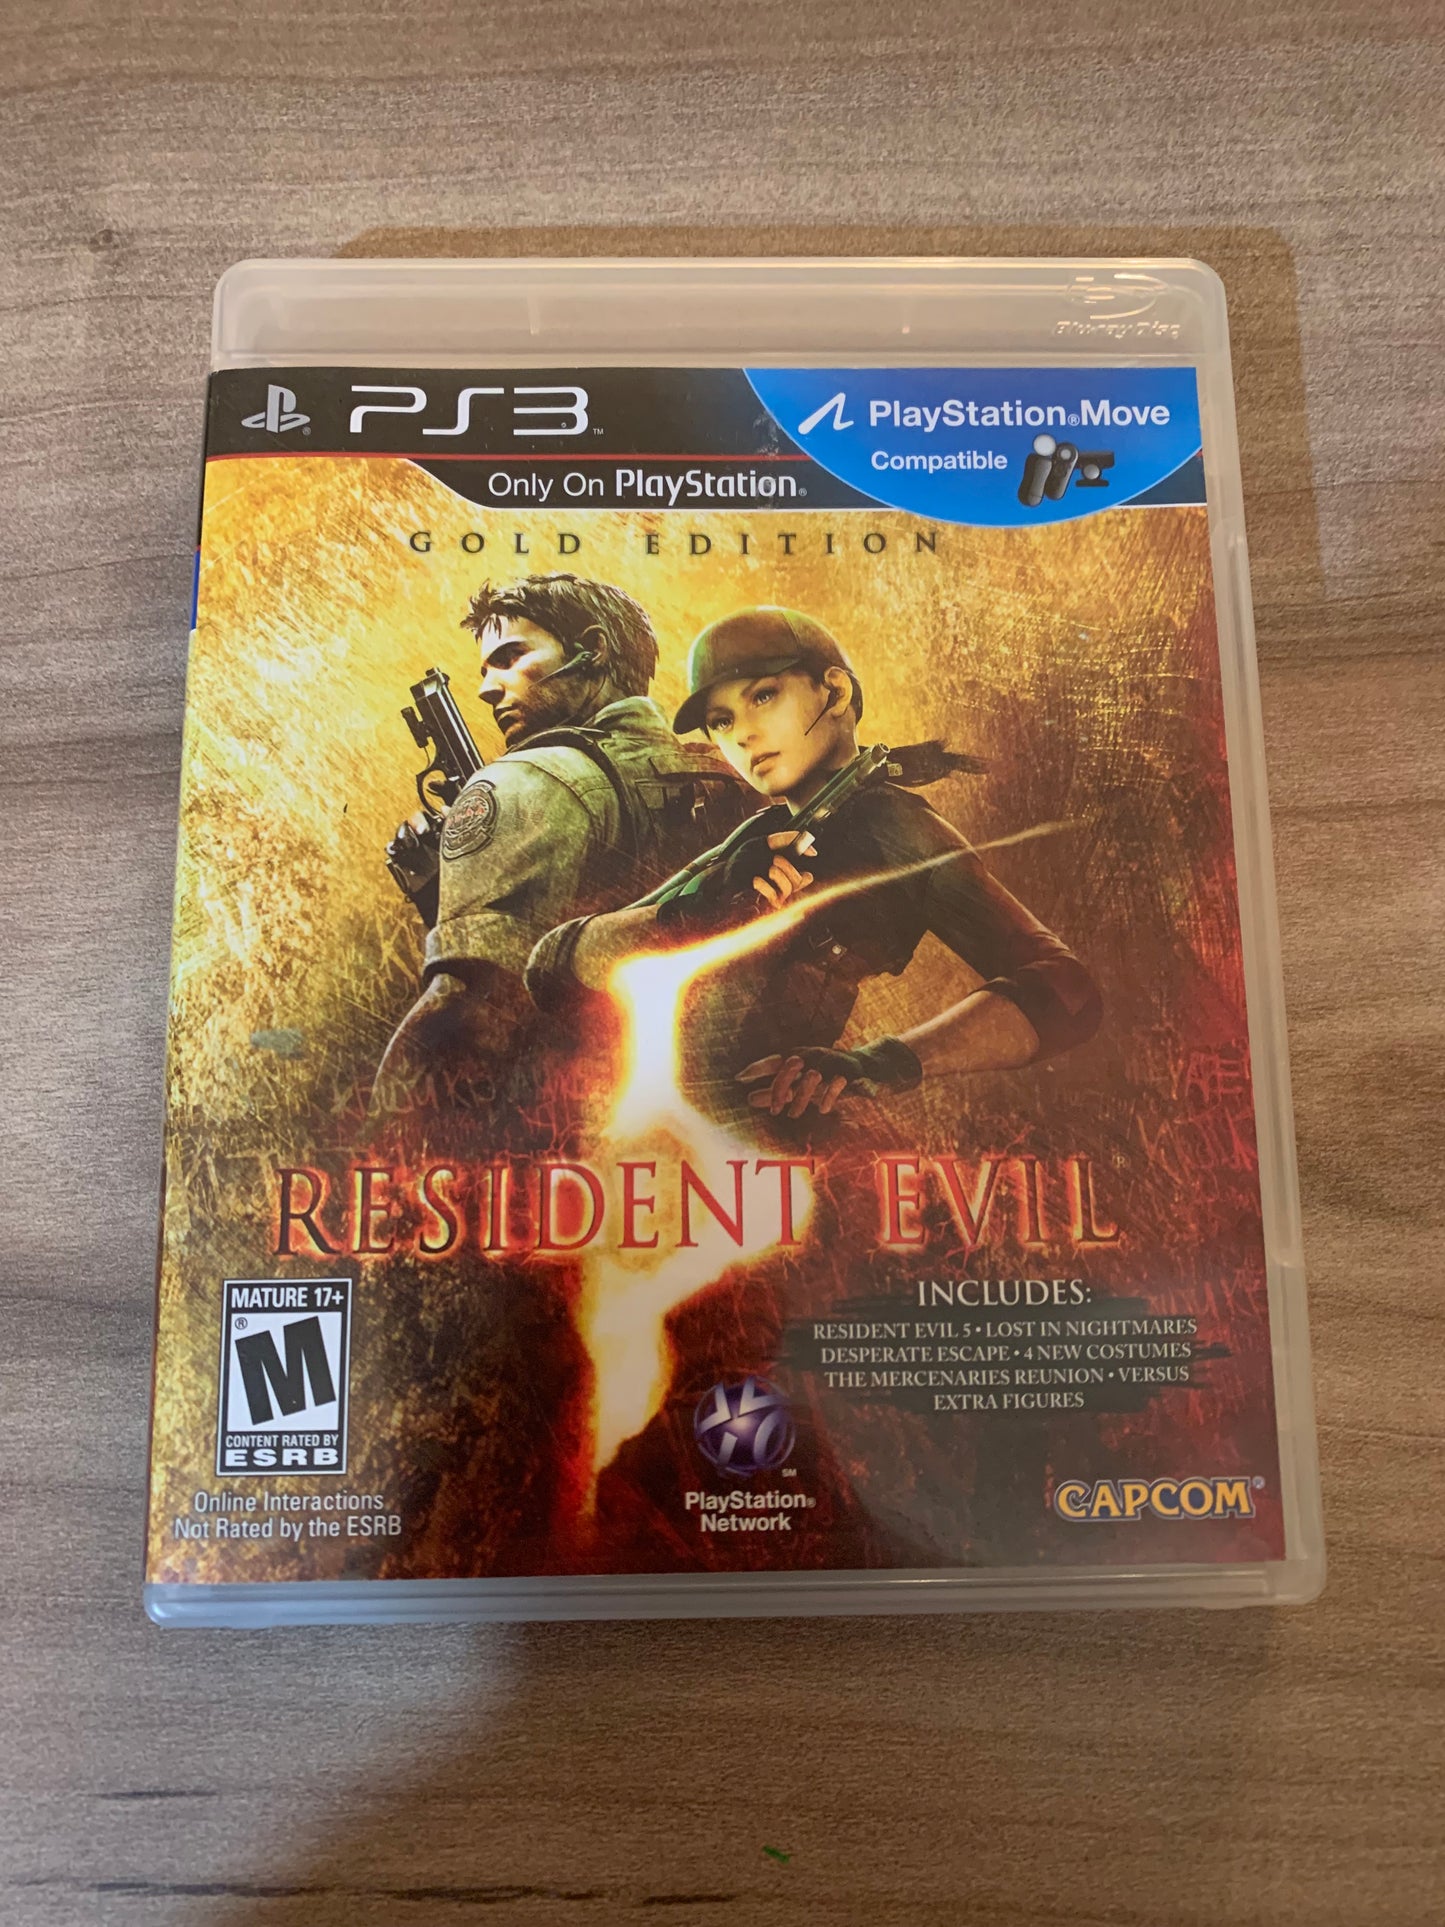 SONY PLAYSTATiON 3 [PS3] | RESiDENT EViL 5 | GOLD EDiTiON